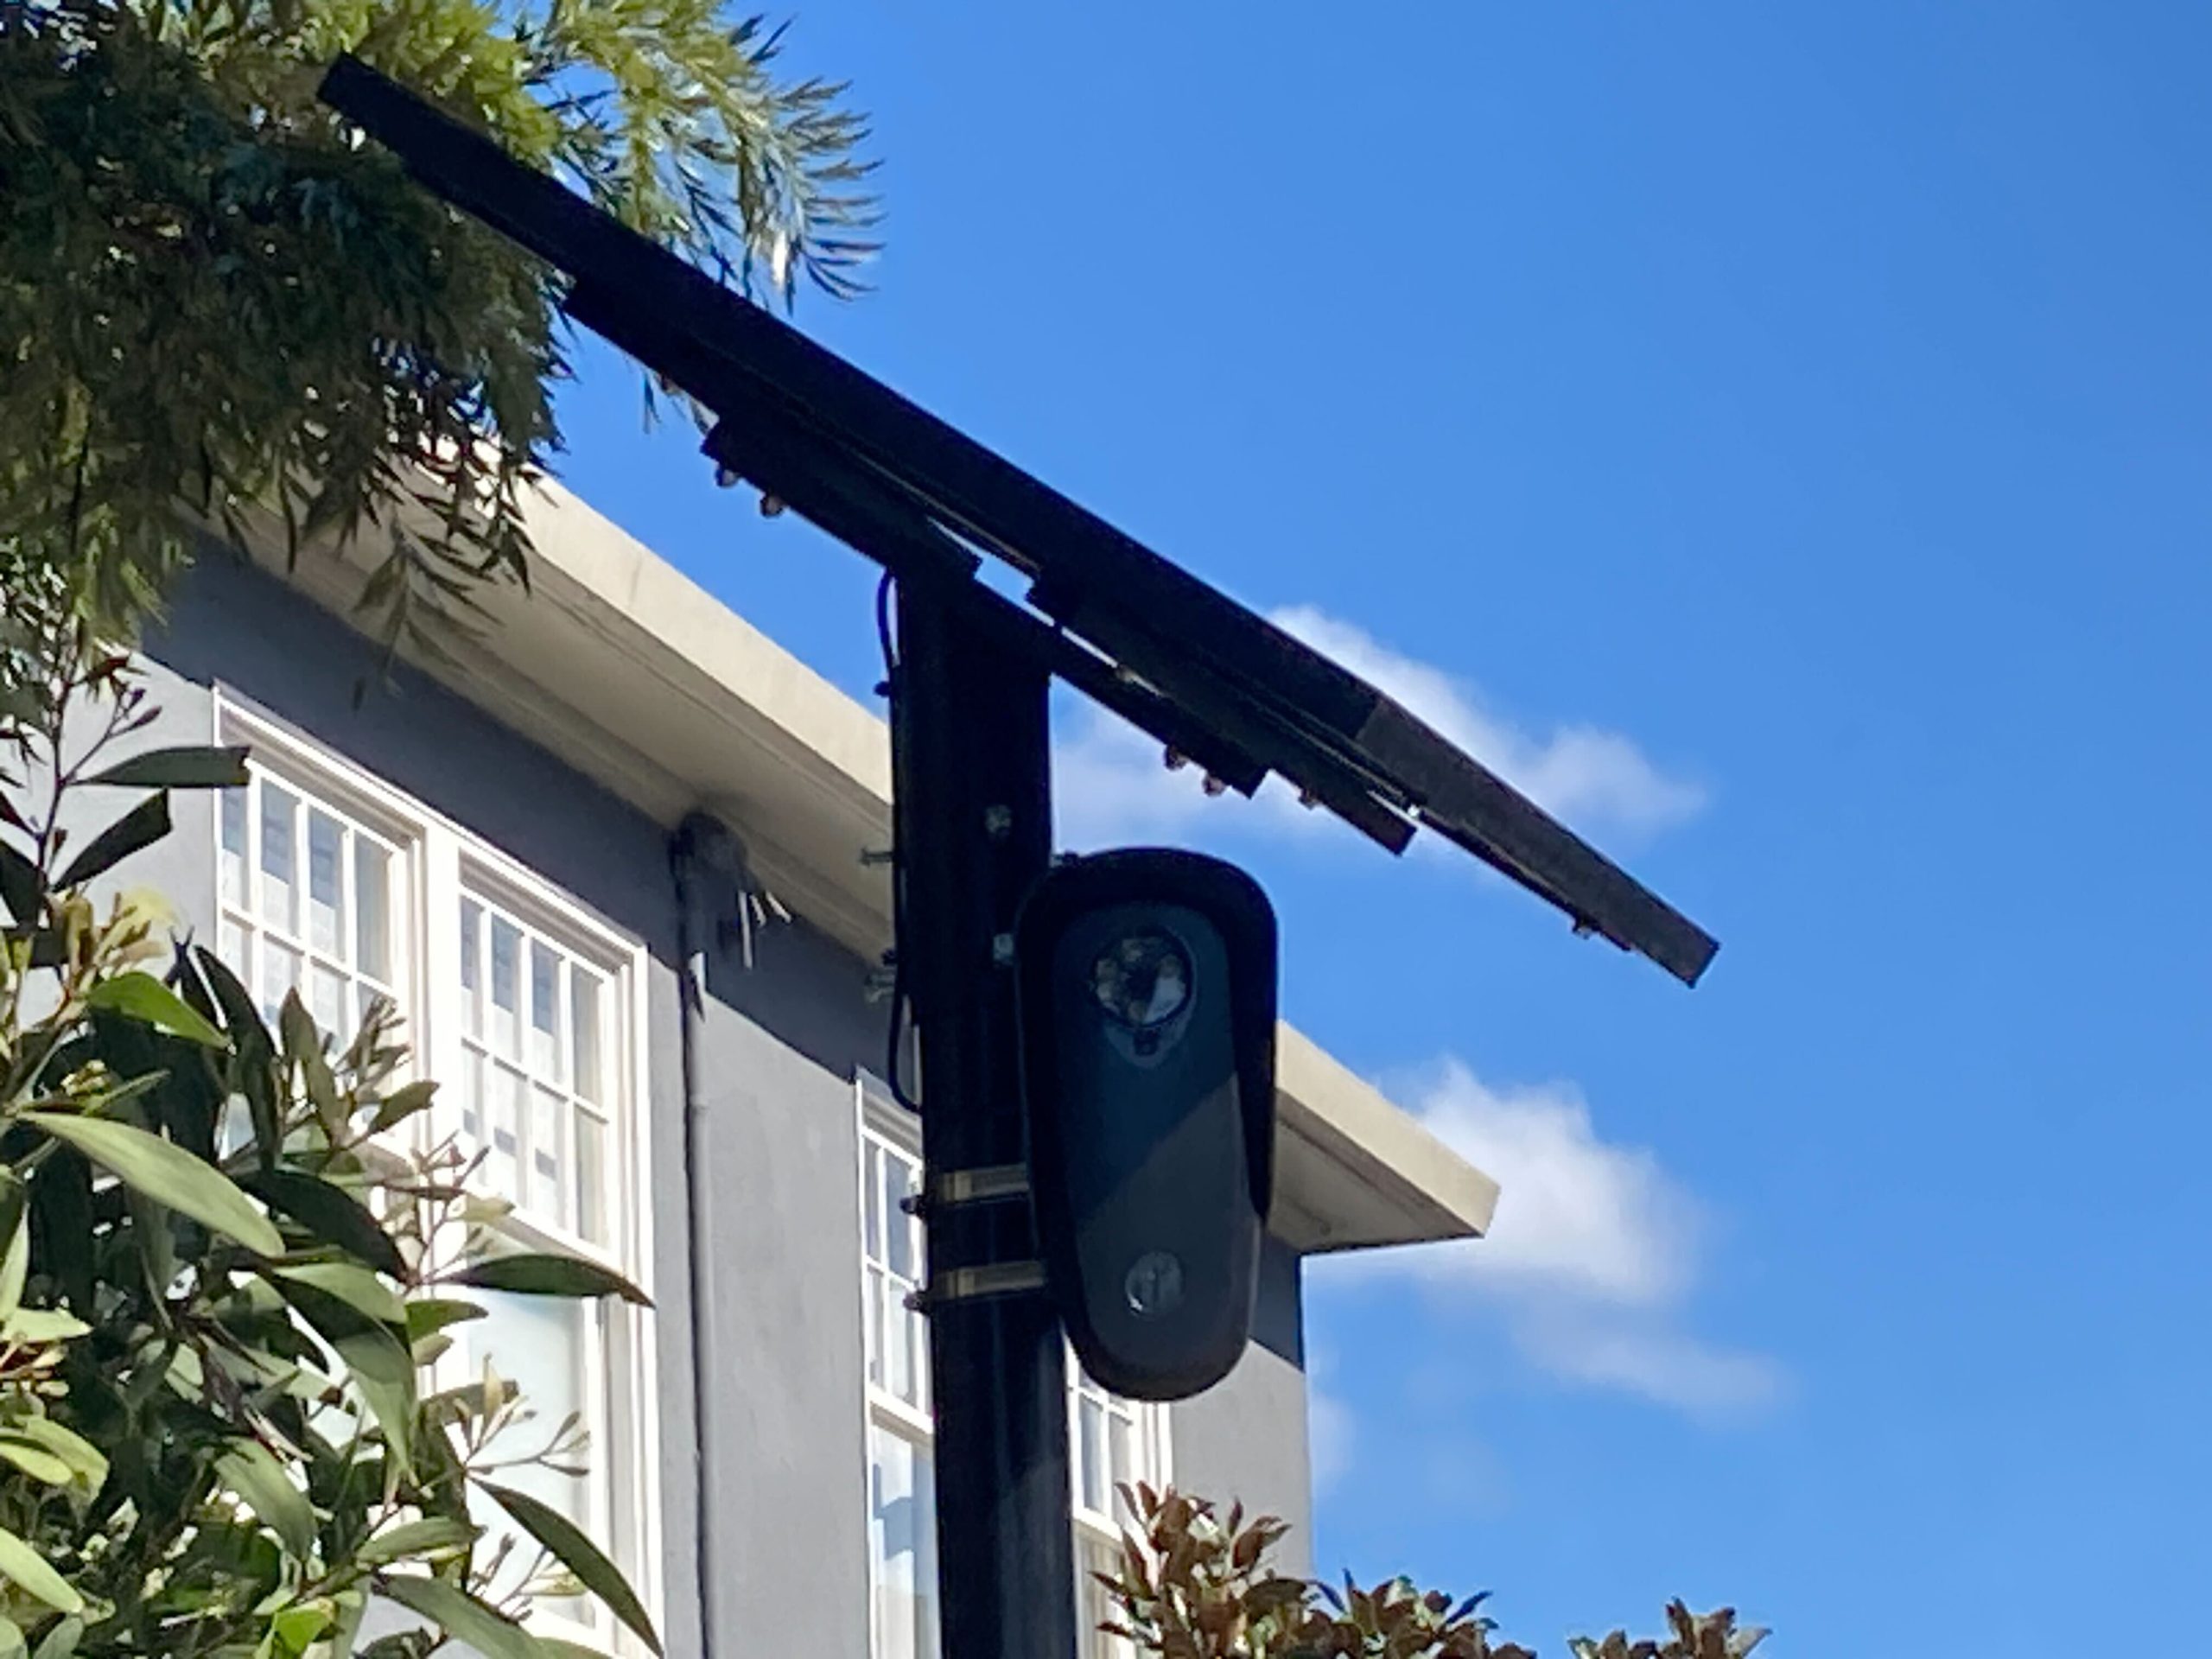 Oakland HOAs are quietly installing surveillance cameras to watch public roads